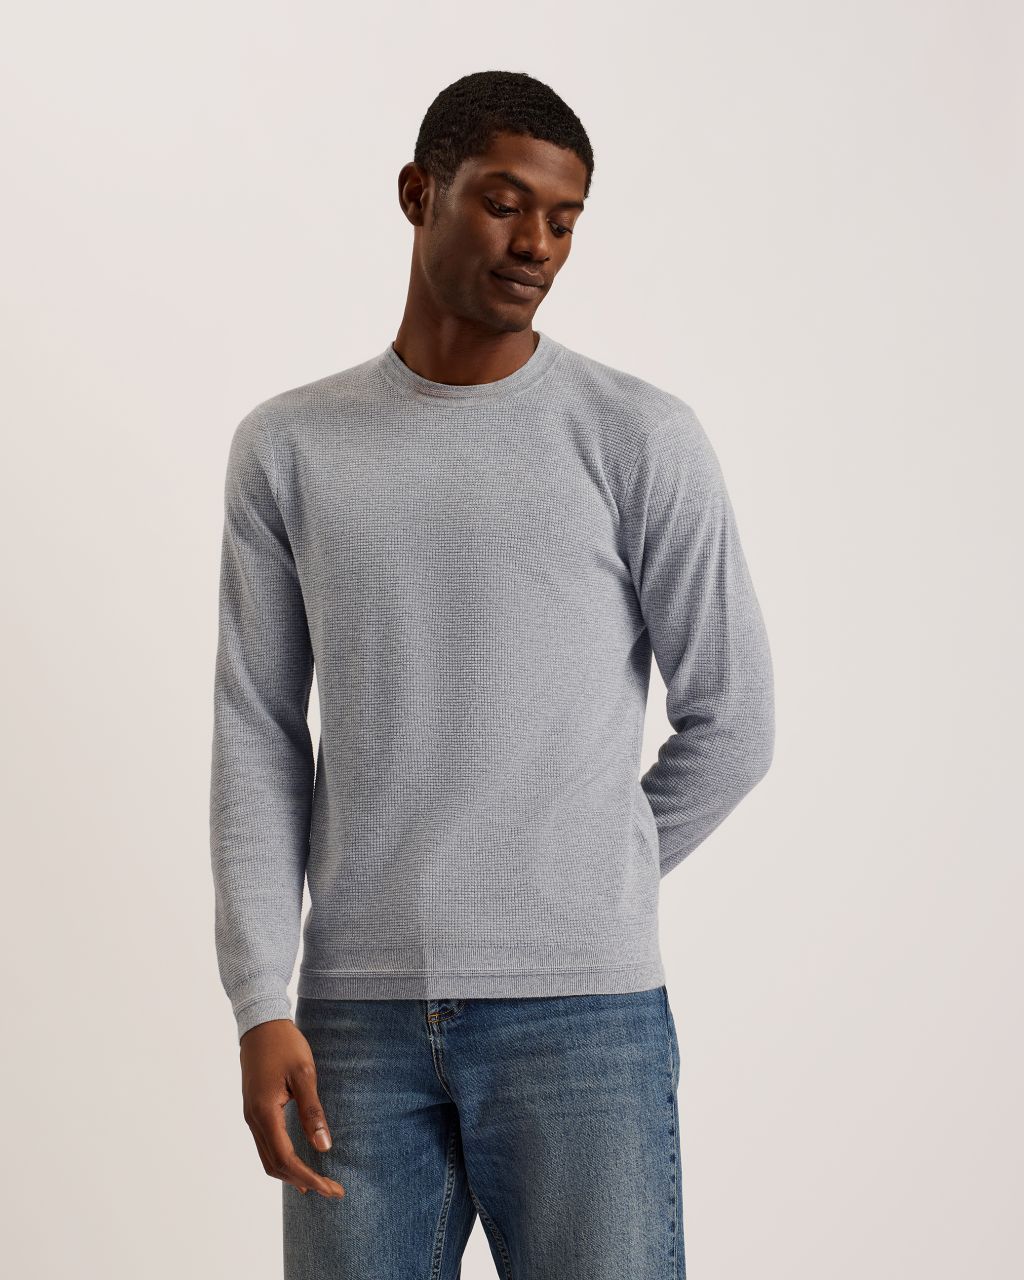 Ted Baker Men's Textured Crew Neck Jumper in Gray Marl, Staylay